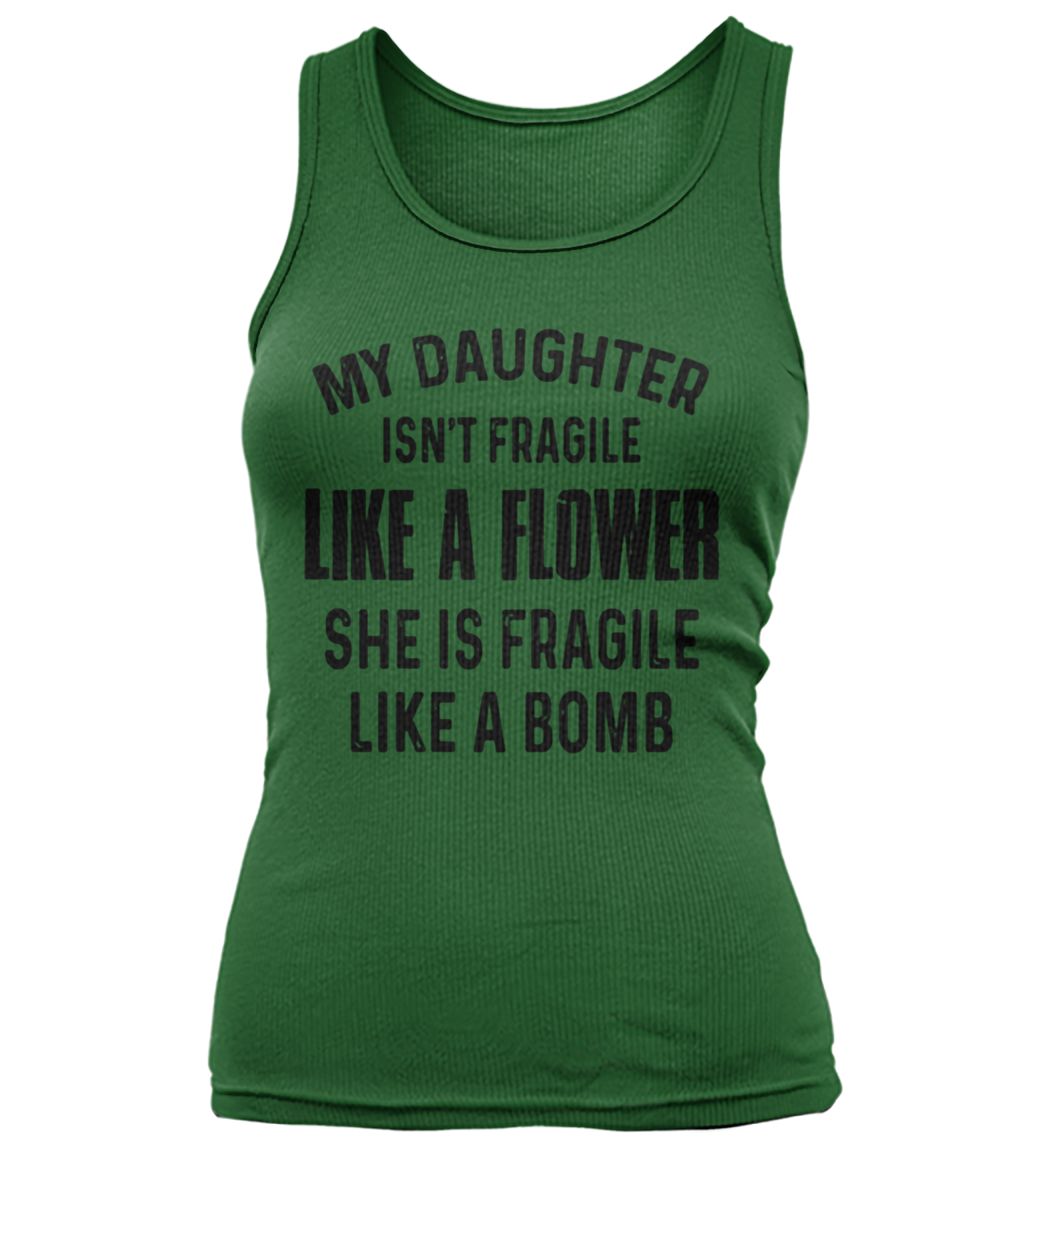 My daughter isn't fragile like a flower she is fragile like a bomb women's tank top